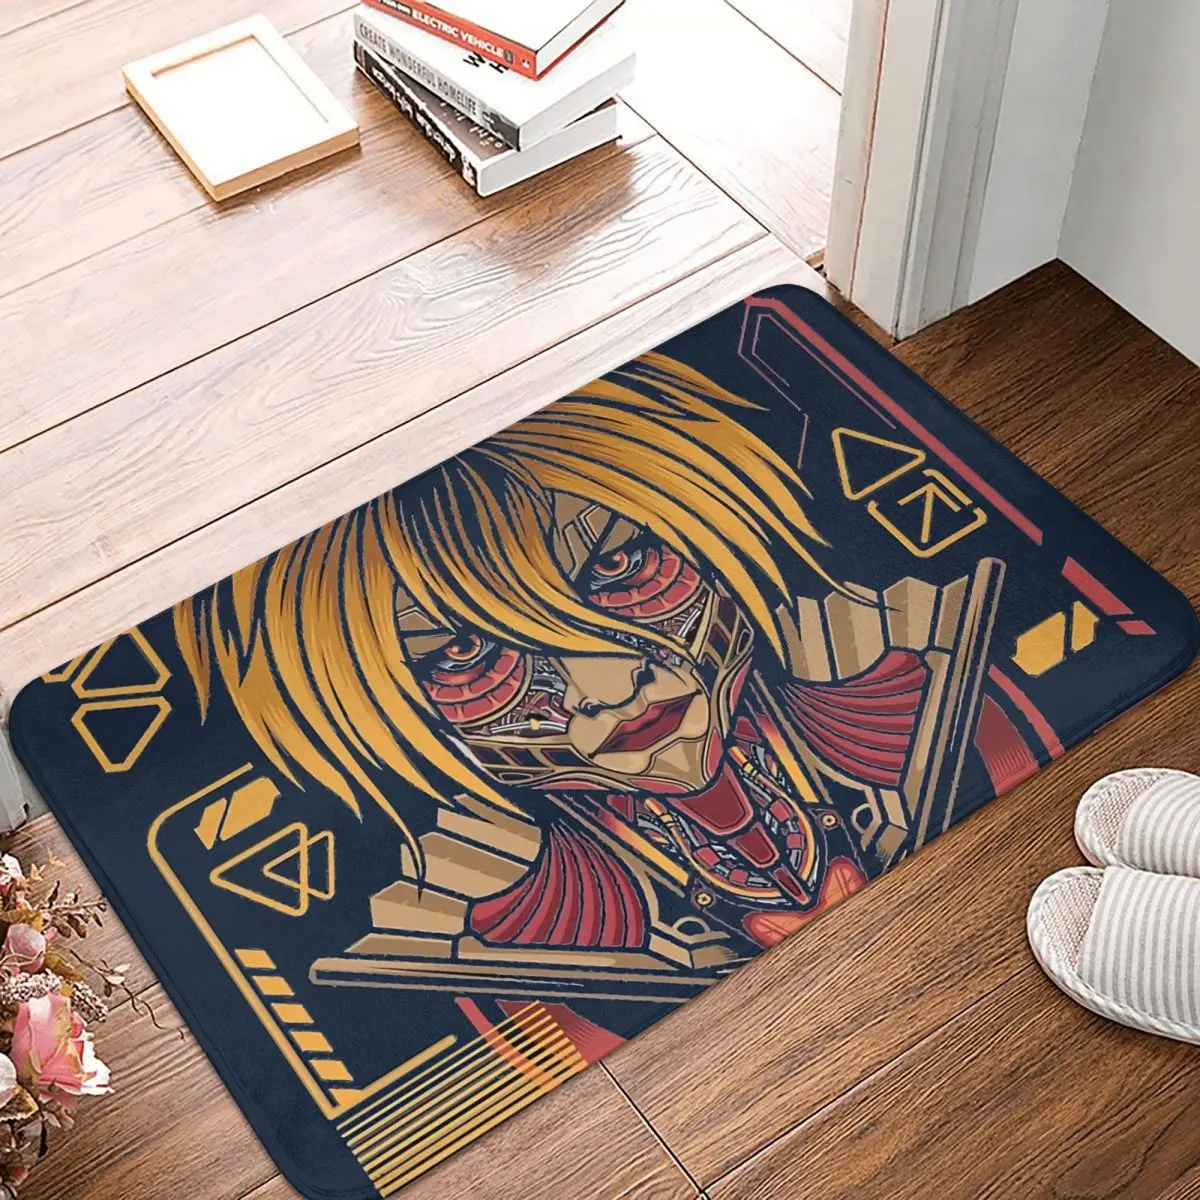 

Attack On Titan Bathroom Mat One Of The Legends Of The Giants Doormat Living Room Carpet Balcony Rug Home Decoration